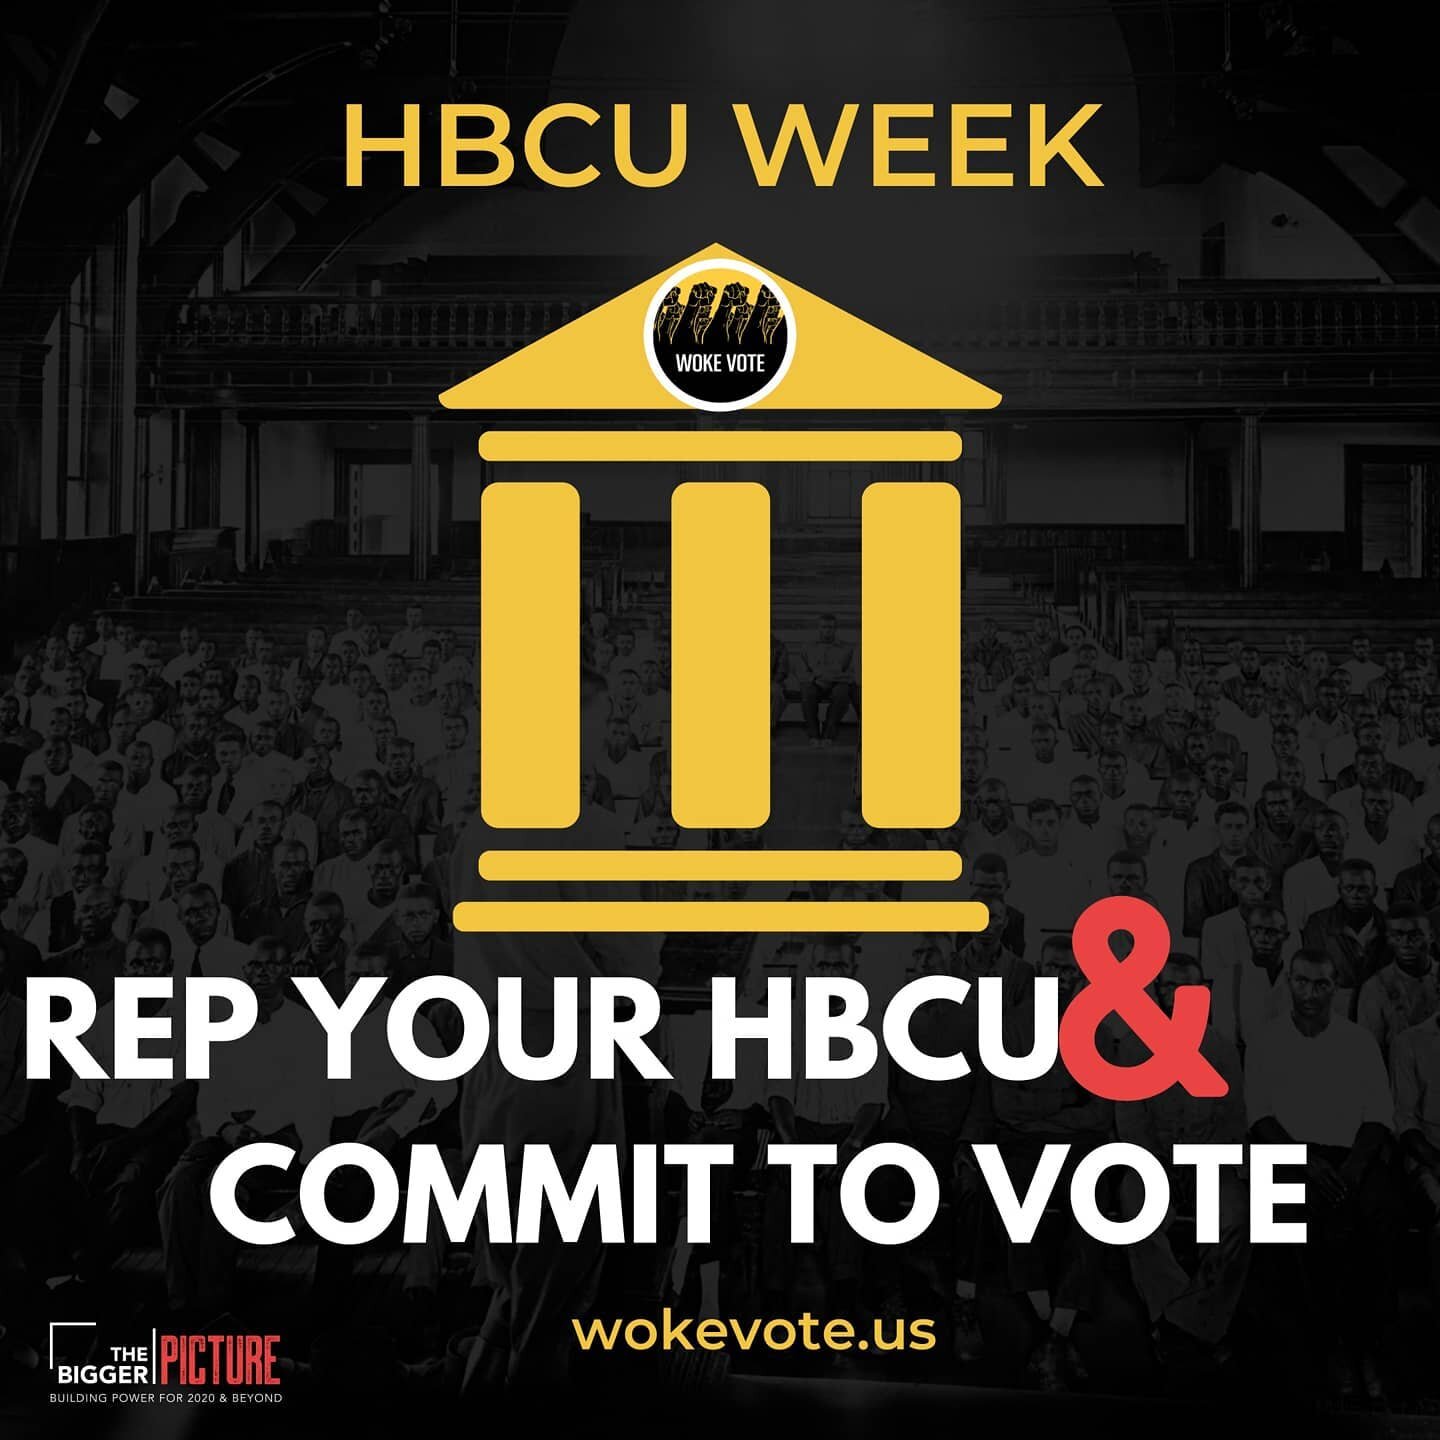 Big s/o to all of the #BlackScholars out there. Its #hbcuweek!
Rep your school in the comments and tell us why you are #commitedtovote!